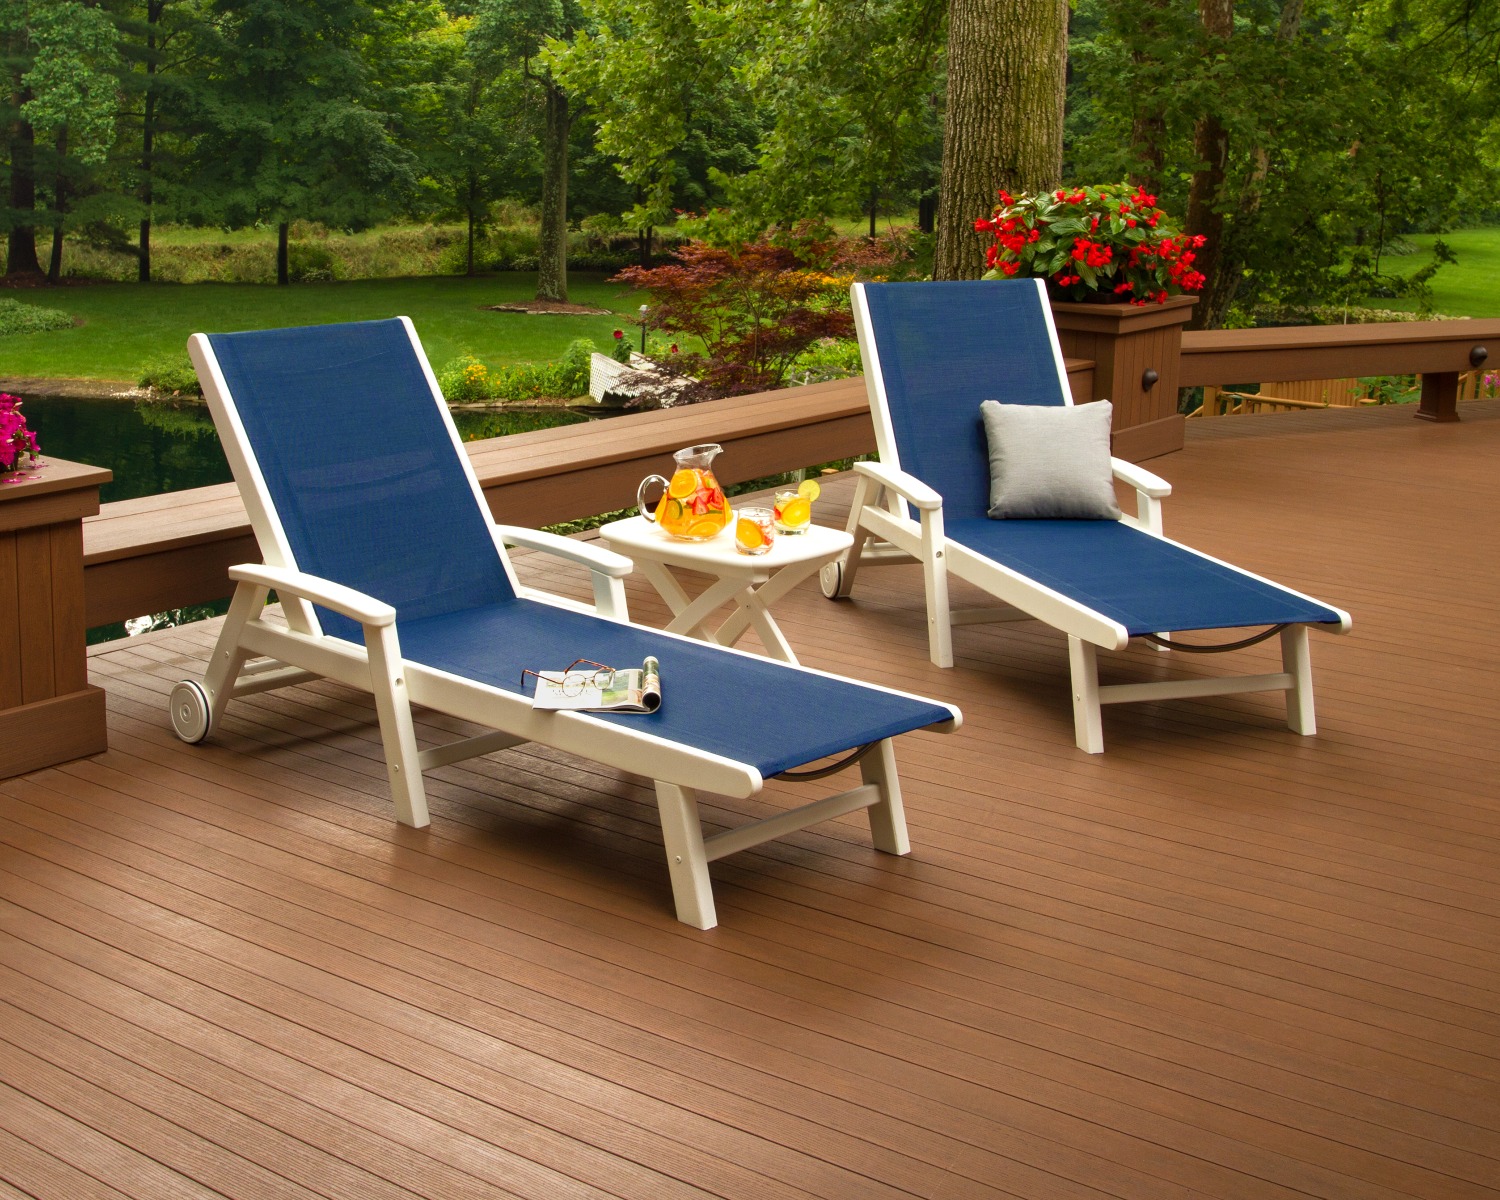 vleugel excuus Macadam Outdoor Chaise Lounges - POLYWOOD®